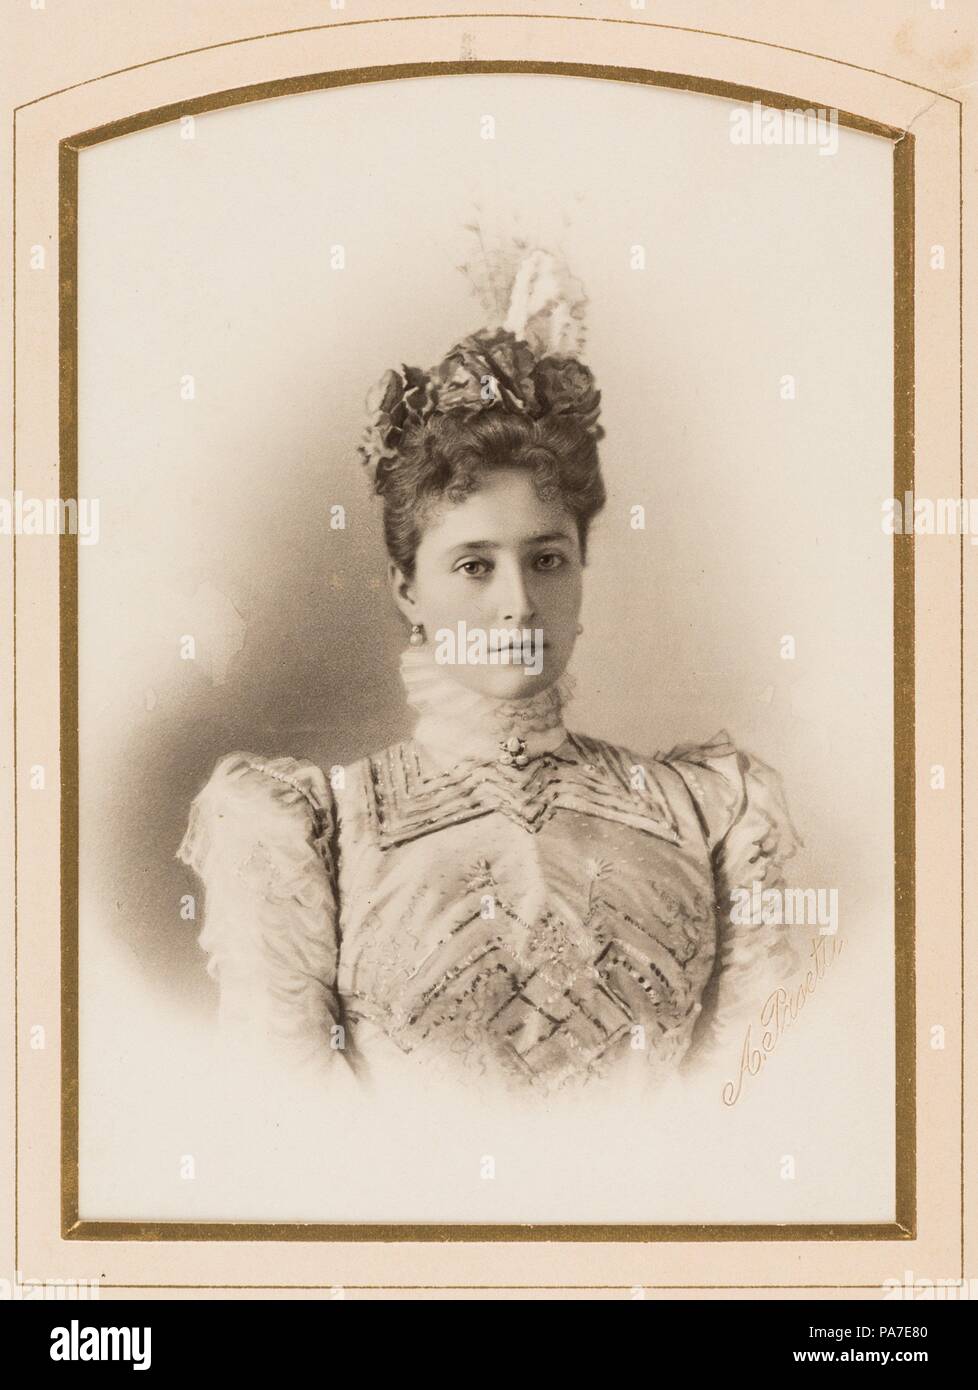 Princess of Hesse by Rhine, the Grand Duchess Elizabeth Fyodorovna of Russia. Museum: PRIVATE COLLECTION. Stock Photo